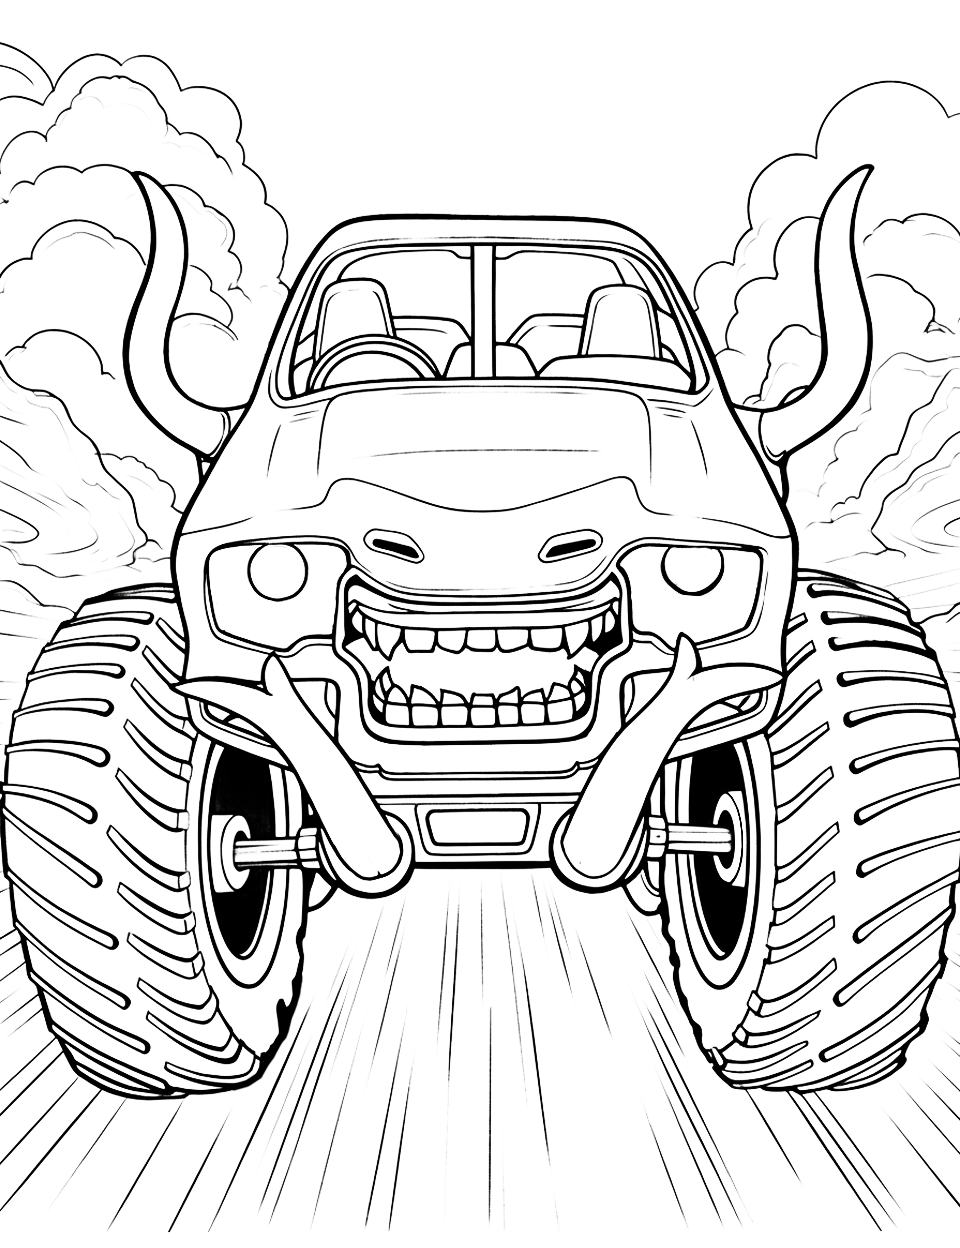 Toro Loco's Bull Charge Monster Truck Coloring Page - The Toro Loco monster truck, horns and all, barreling down a dirt road.